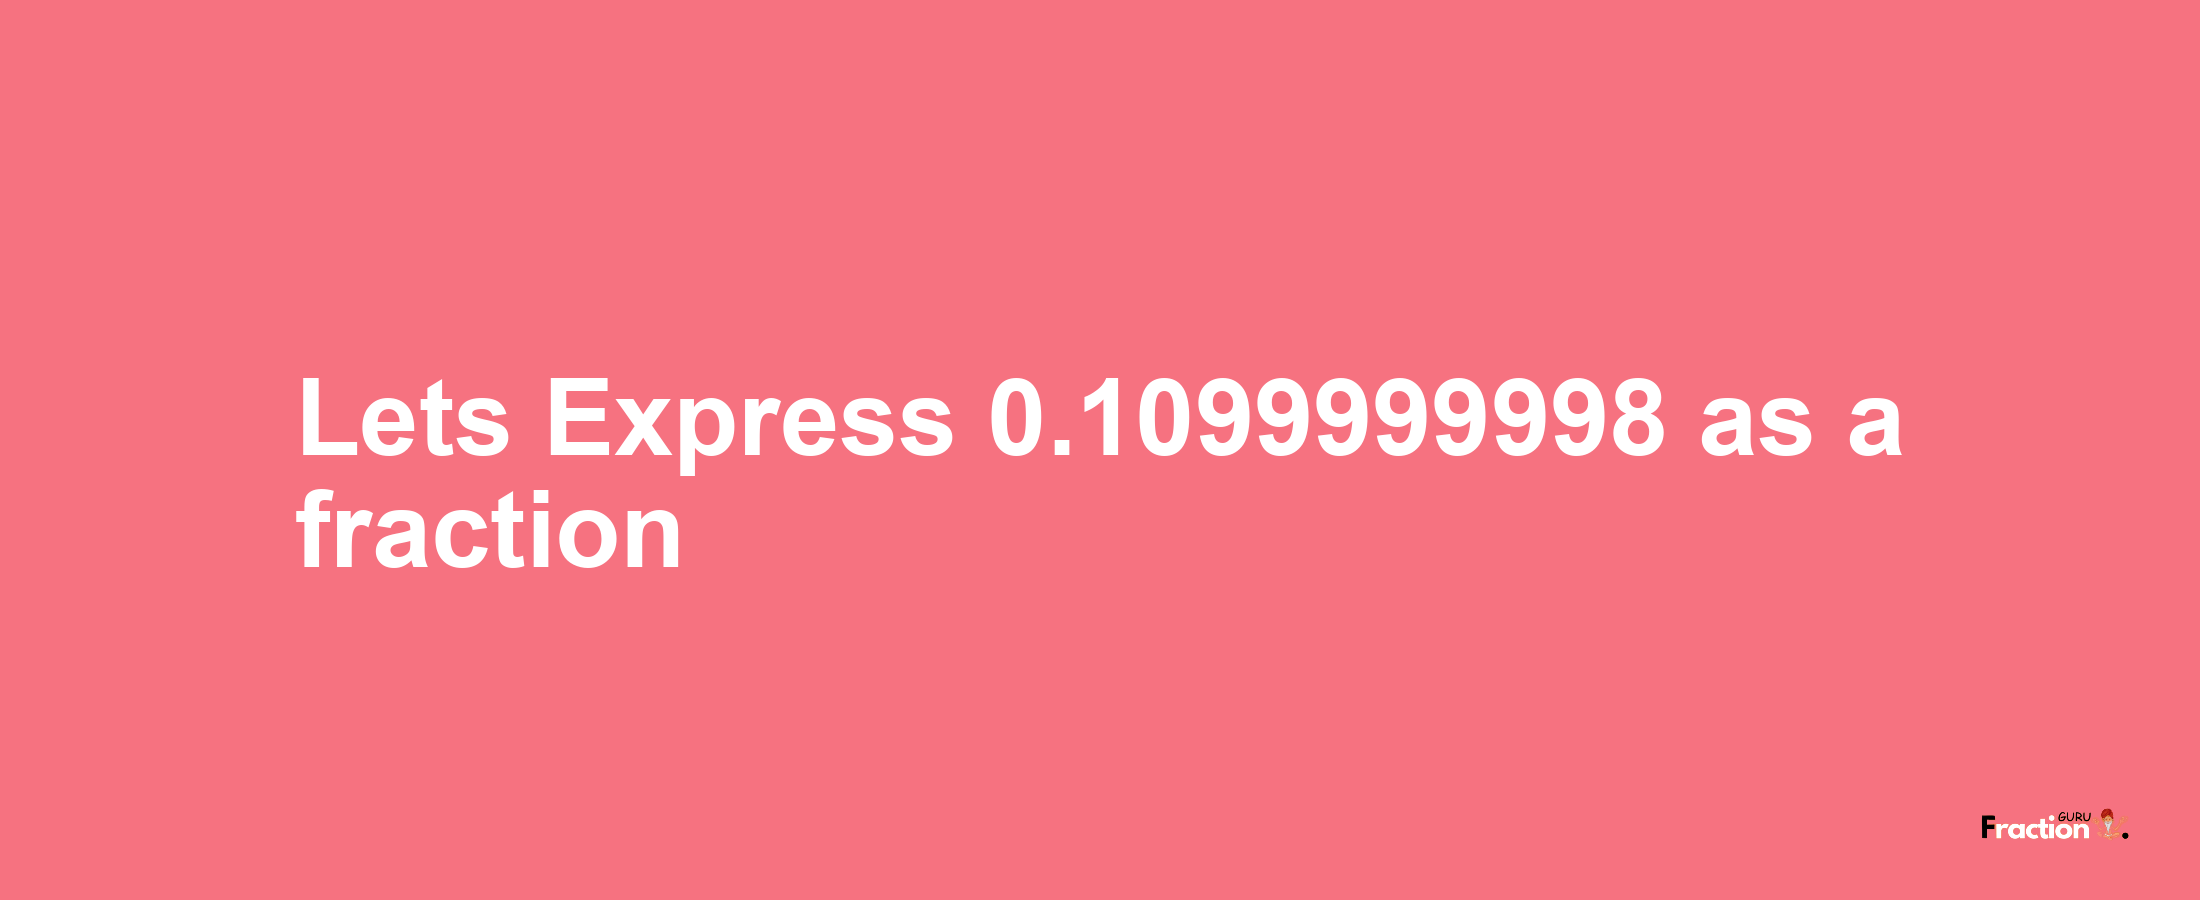 Lets Express 0.1099999998 as afraction